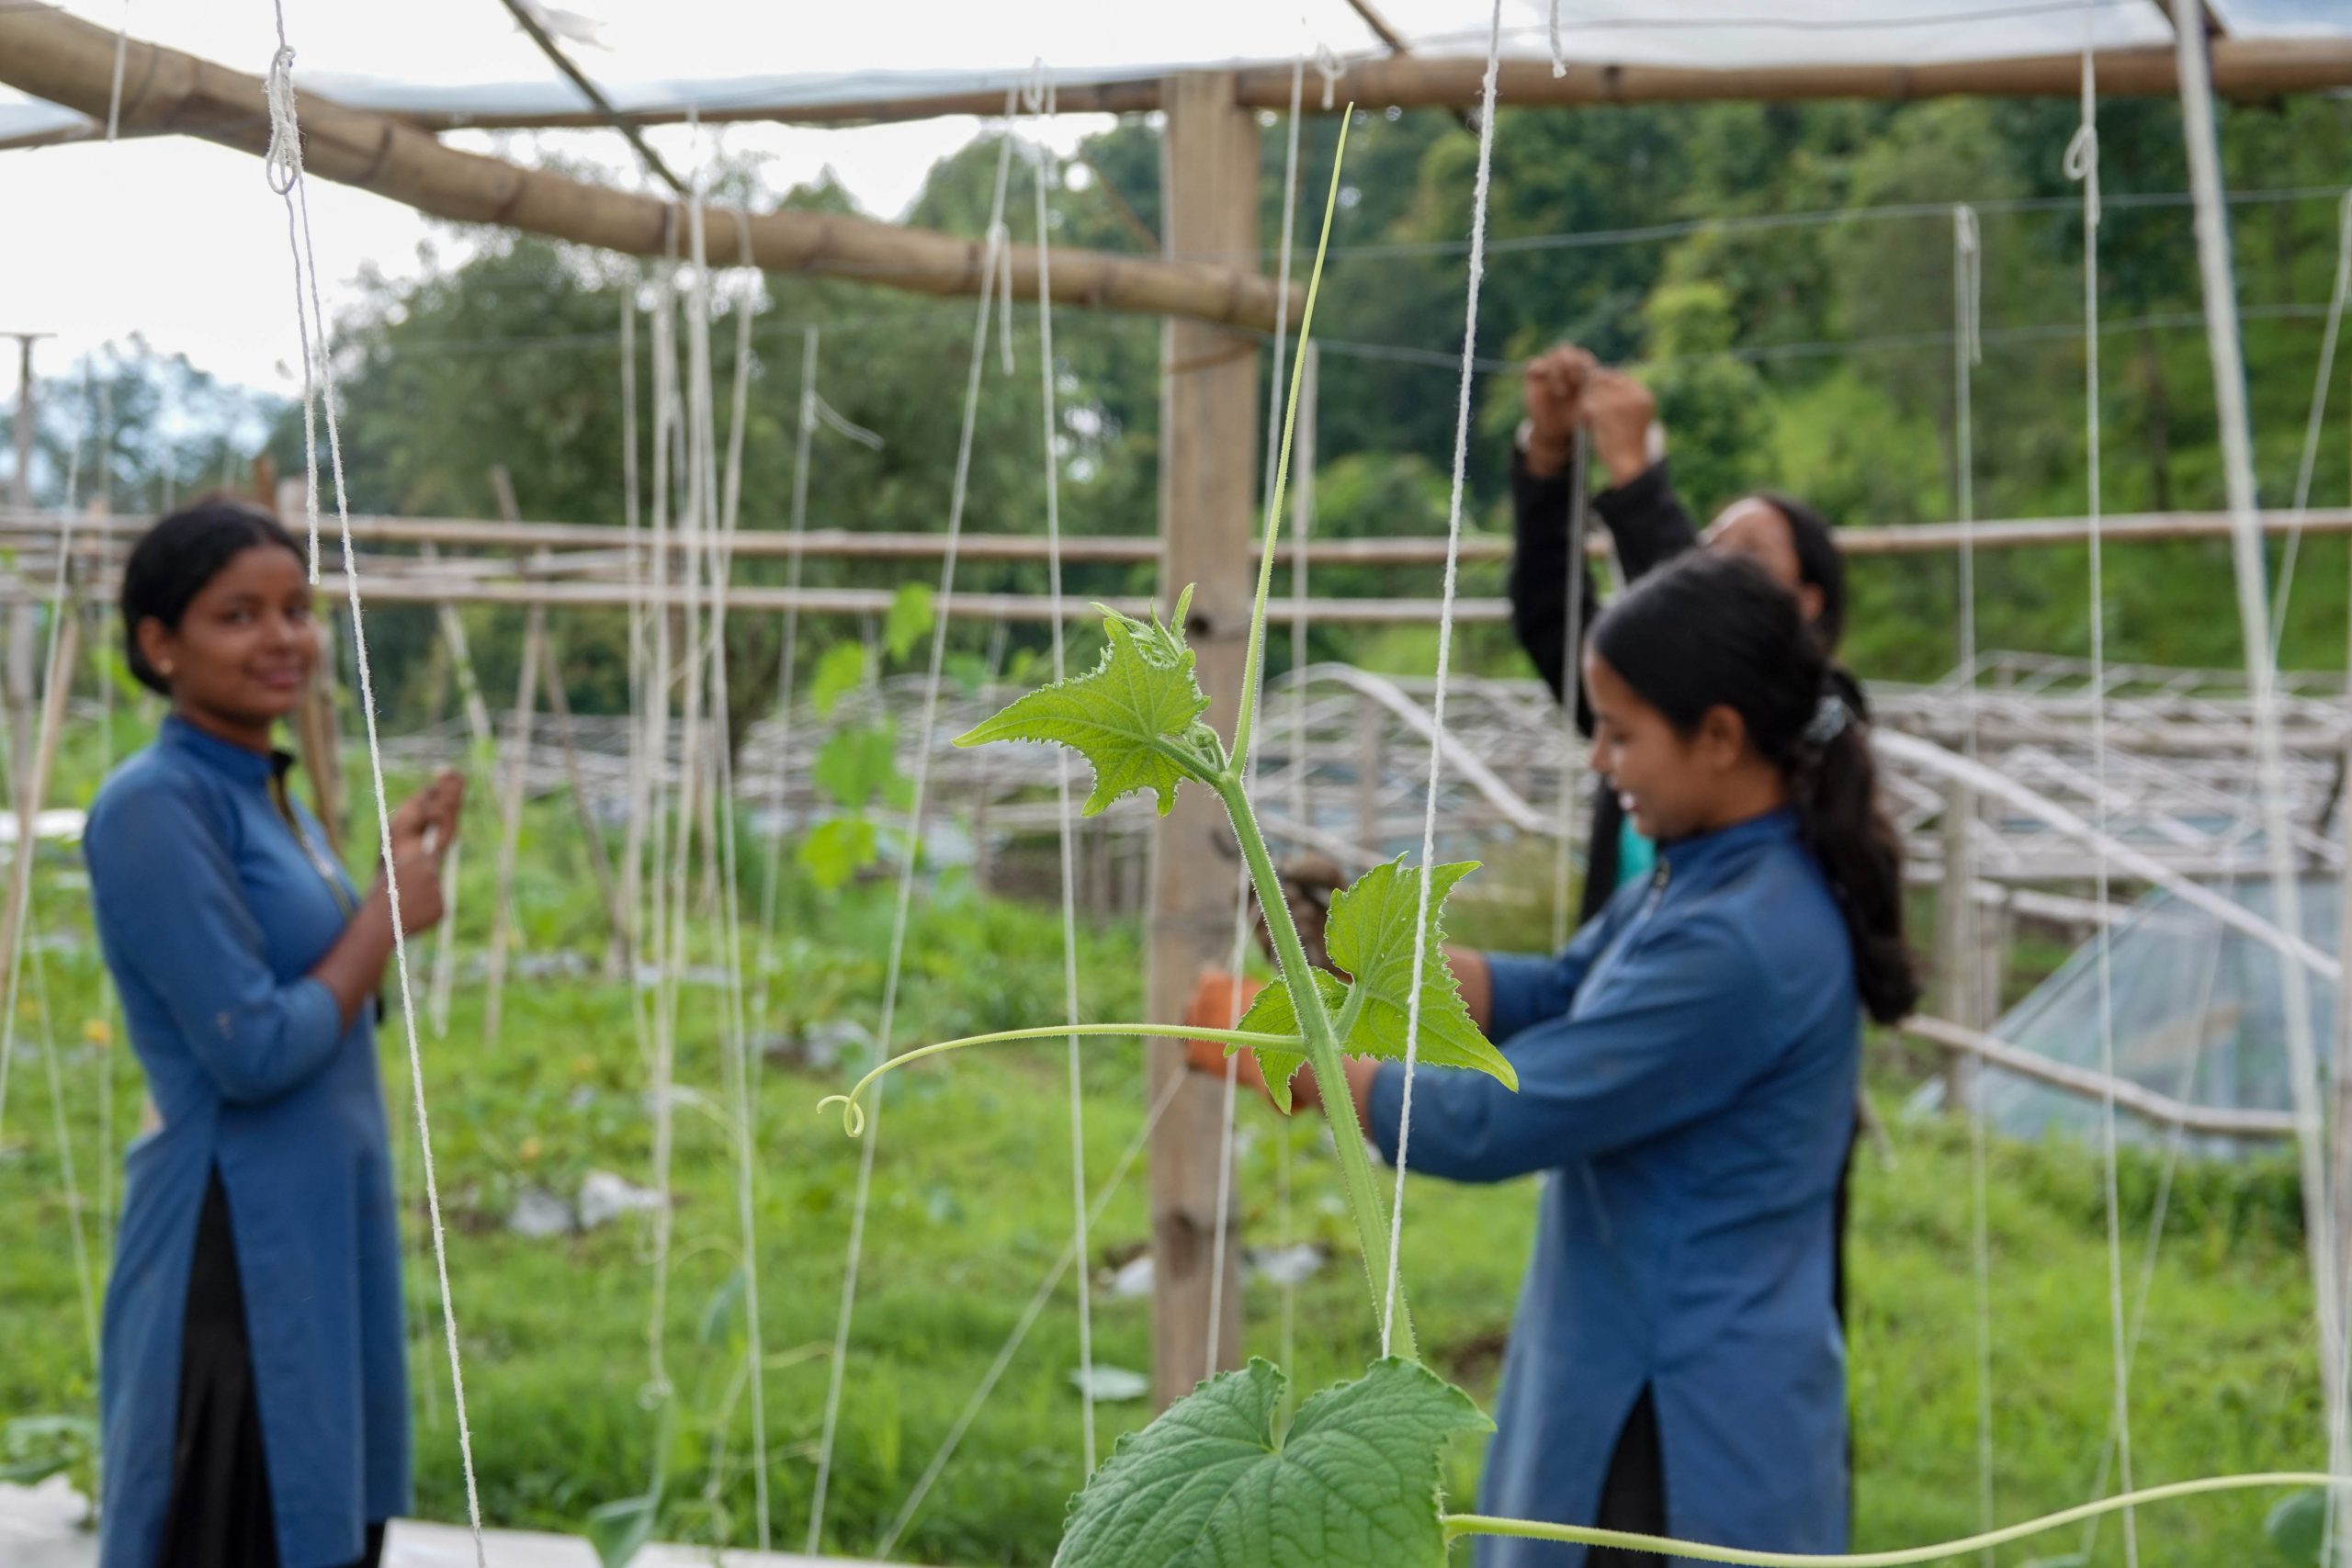 Three young girls working on a tomato trellis